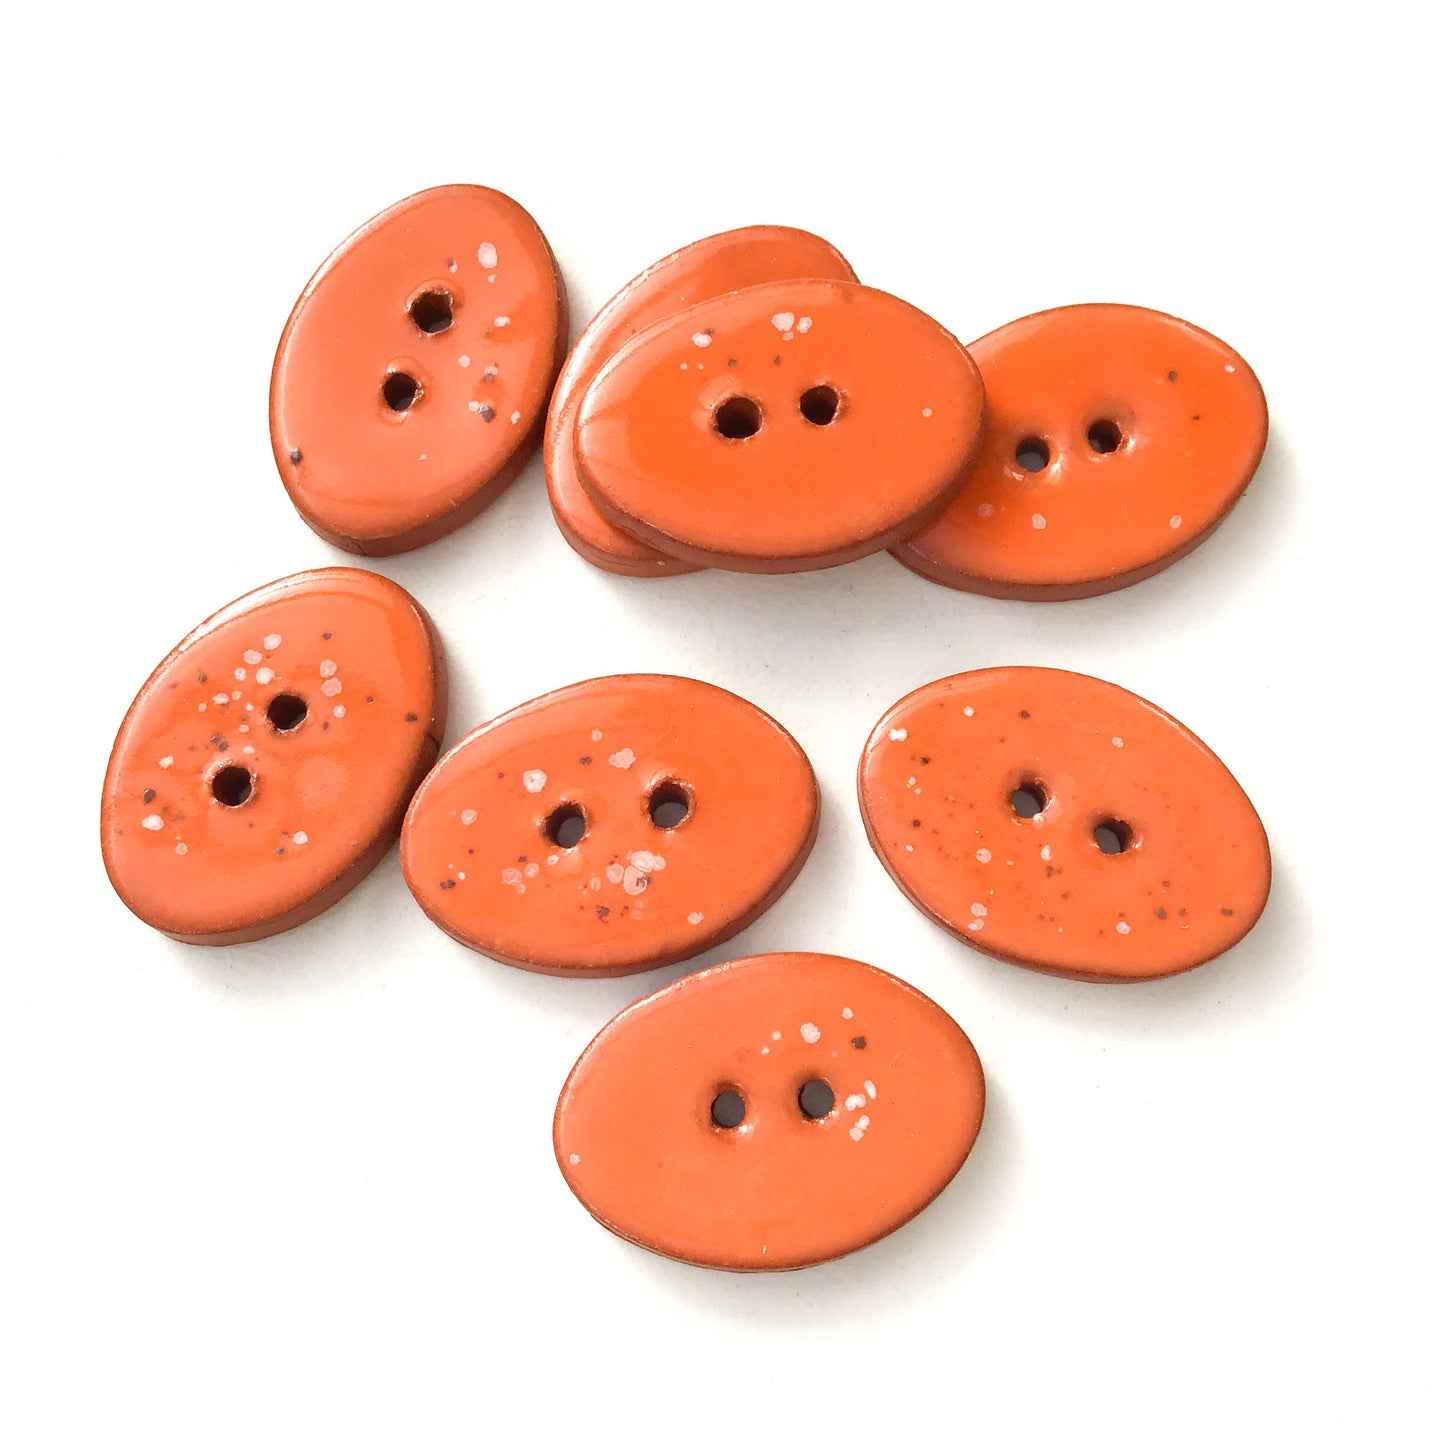 Speckled Orange Oval Clay Buttons - 5/8" x 7/8" - 8 Pack (ws-227)